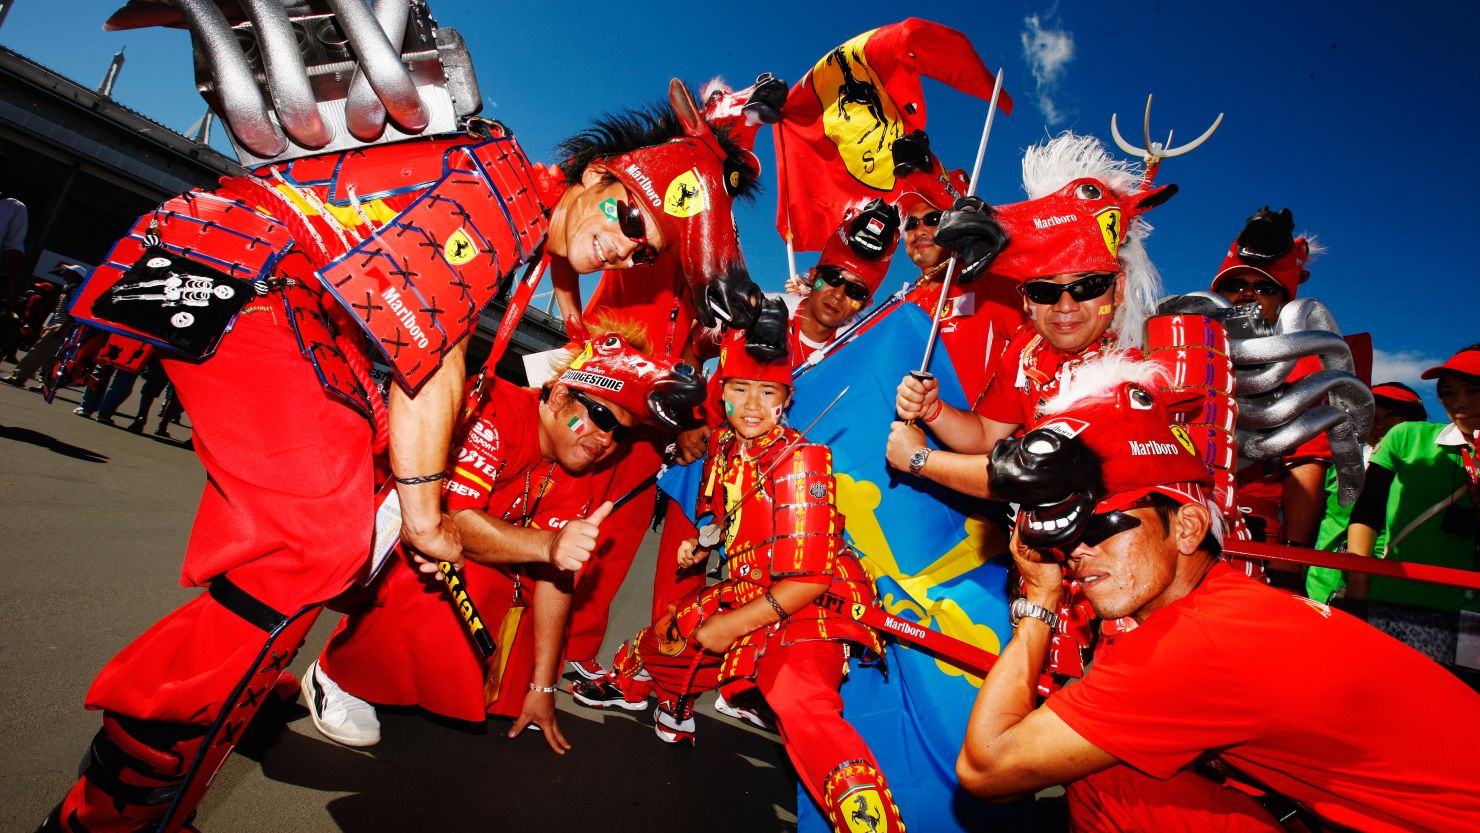 A group of Formula One fans in Japan show their support for Ferrari ahead of the grand prix in Suzuka last season.